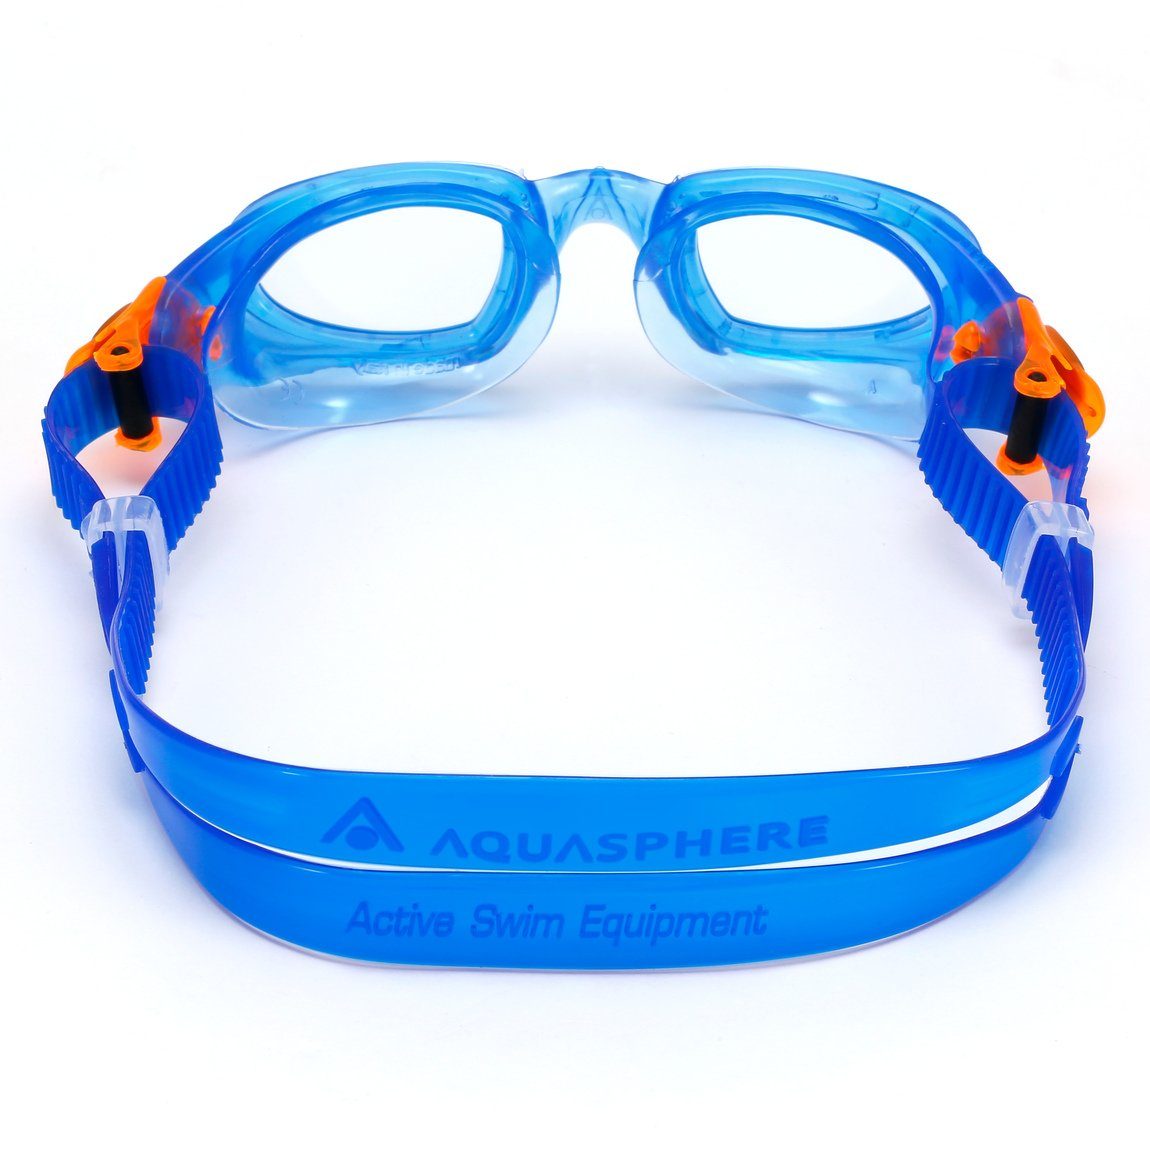 KID Schwimmbrille Aqualung MOBY